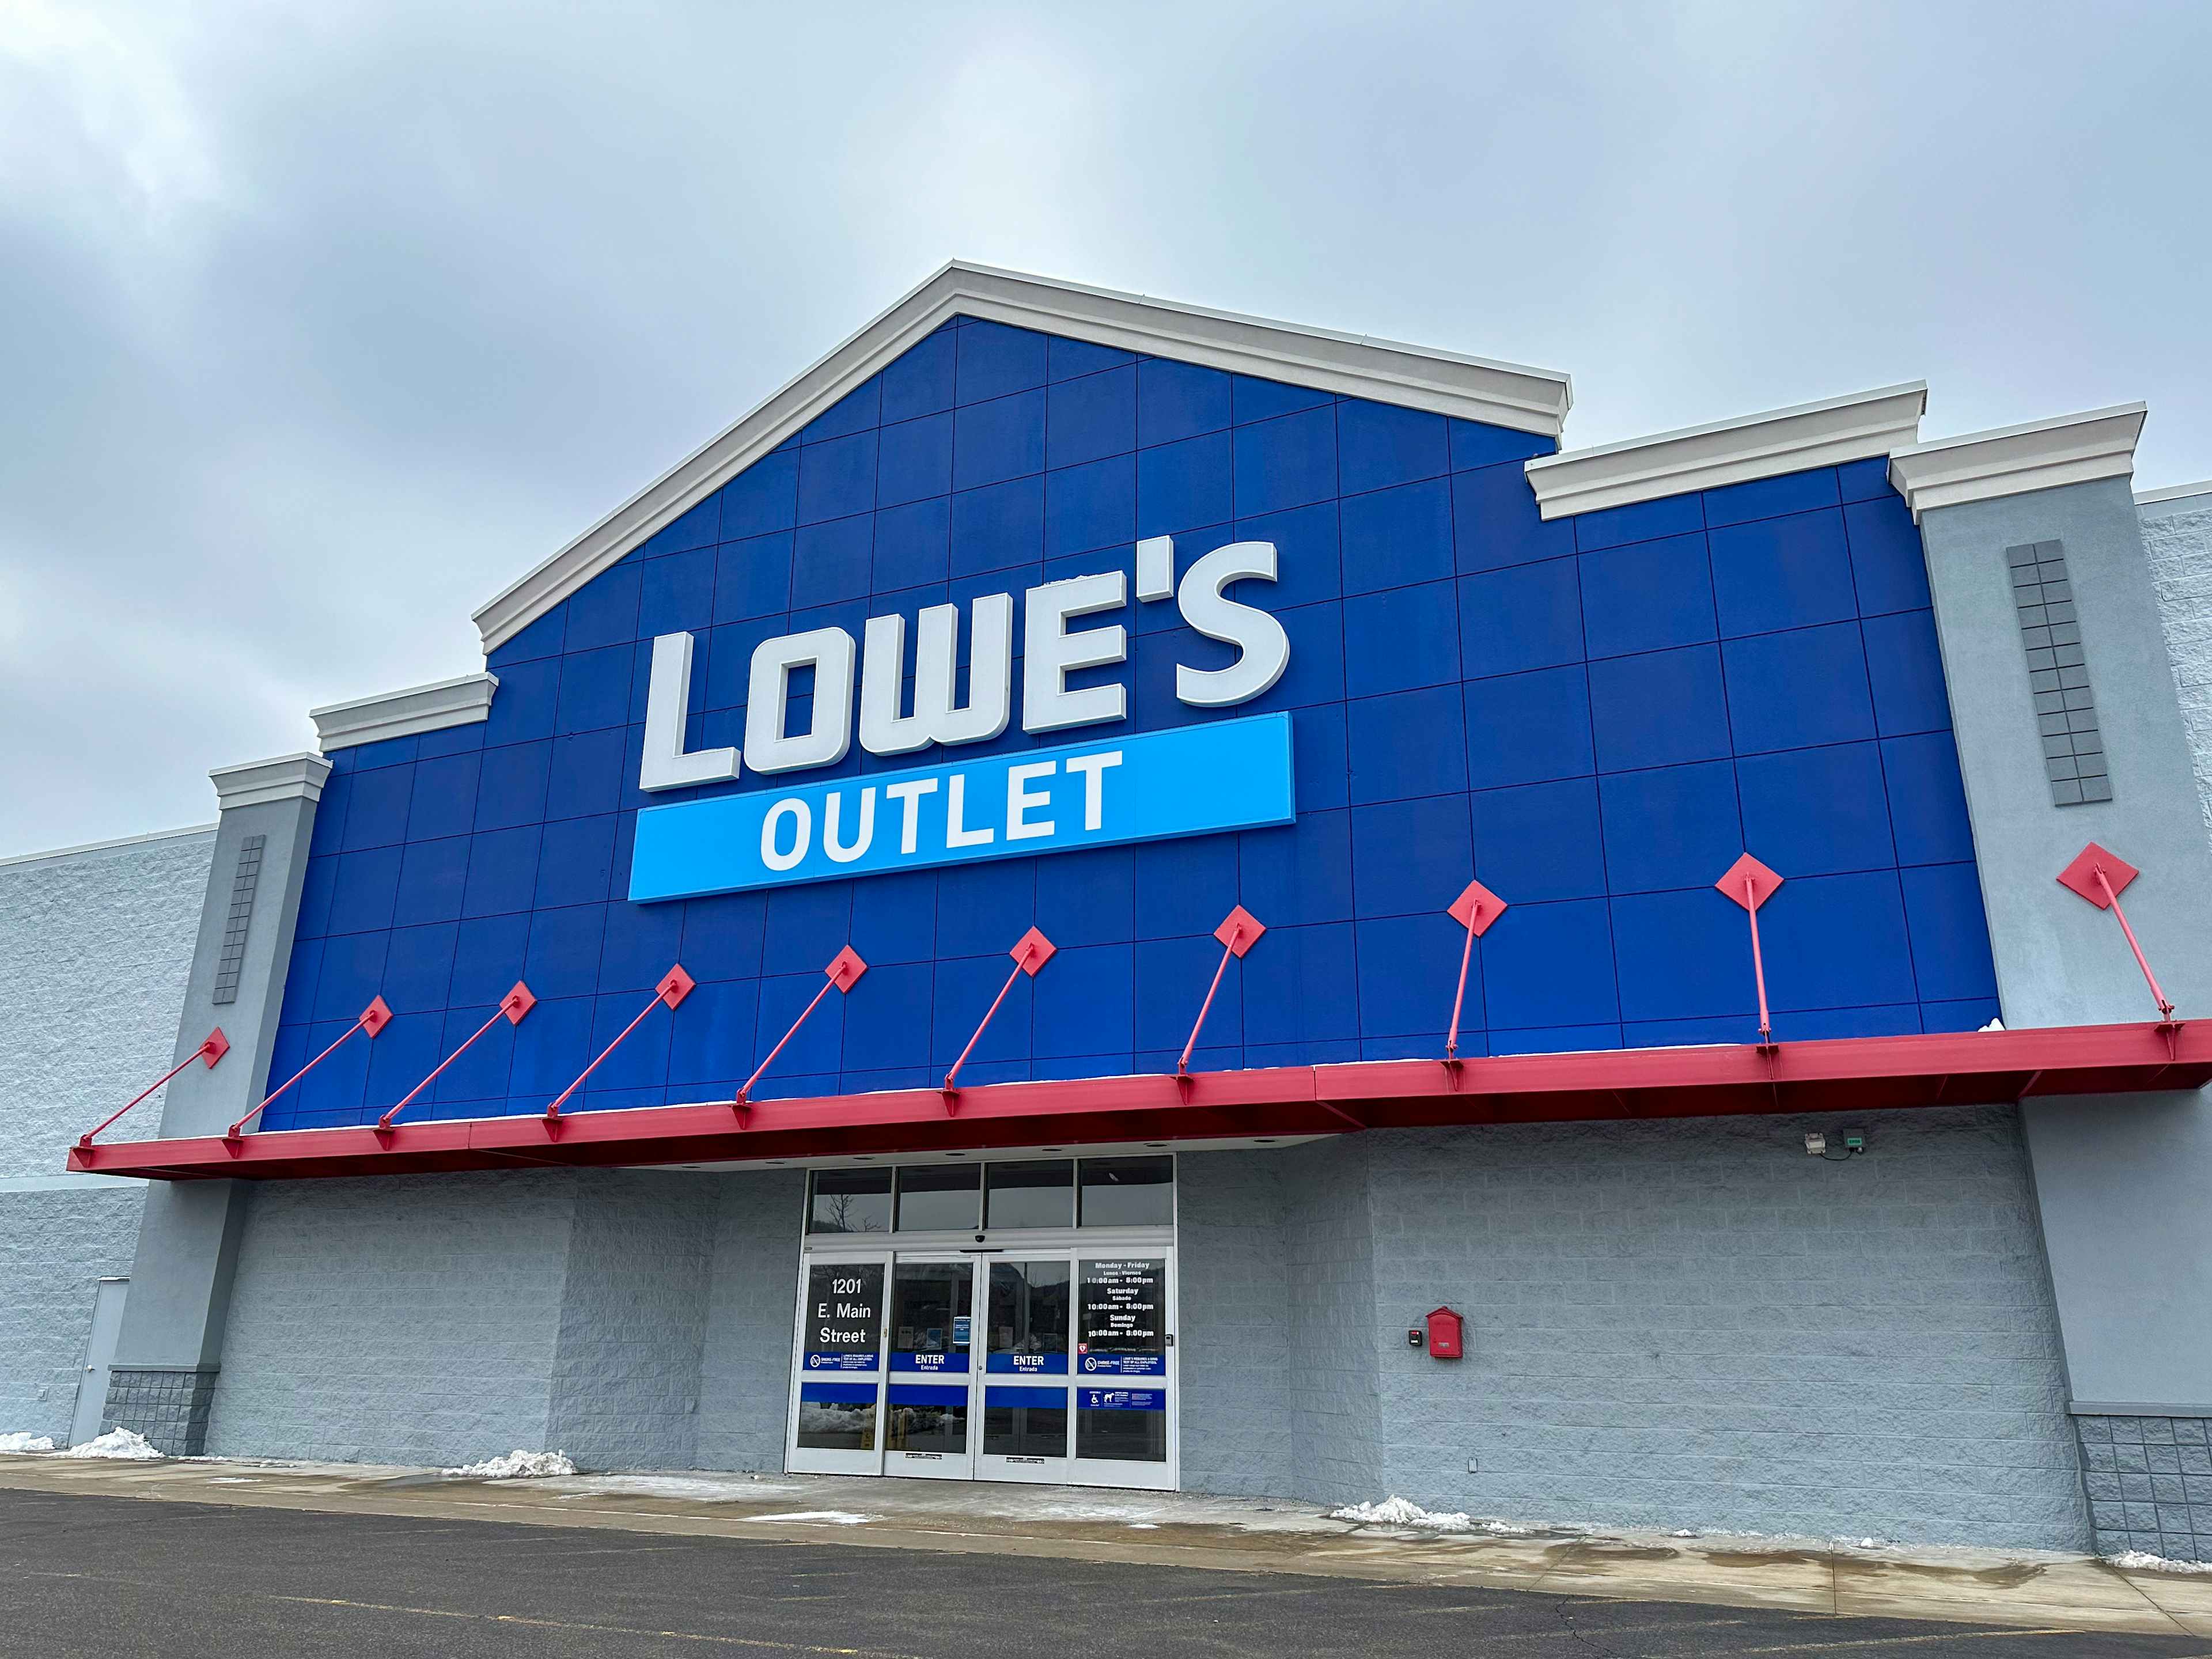 Lowe's Outlet: Locations, Savings, and Benefits - The Krazy Coupon Lady